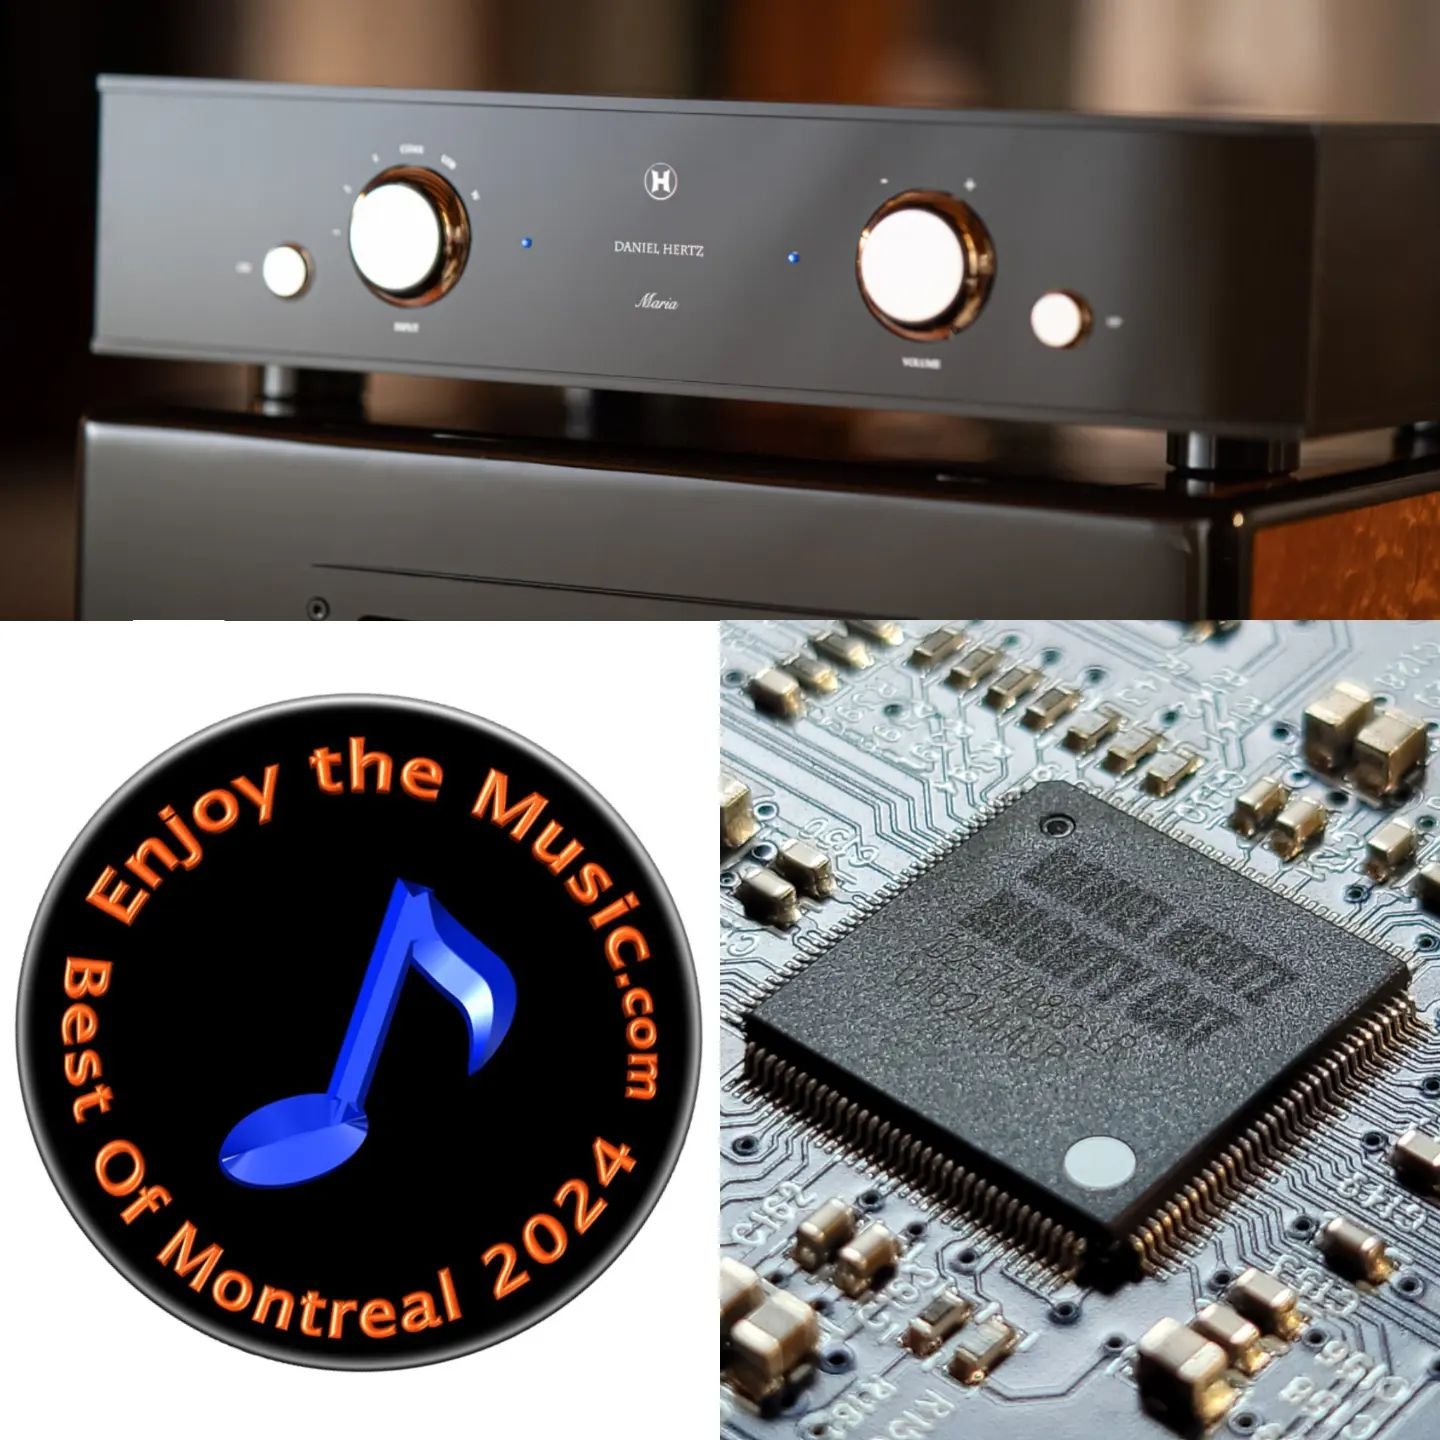 Congratulations to Mark and Team @danielhertzsa for their 'Best of Montreal 2024' award from @enjoythemusic . Thanks too to Adrian at @audio_excellence and his team for putting on such an excellent showcase for what the Maria amplifier and Chiara spe